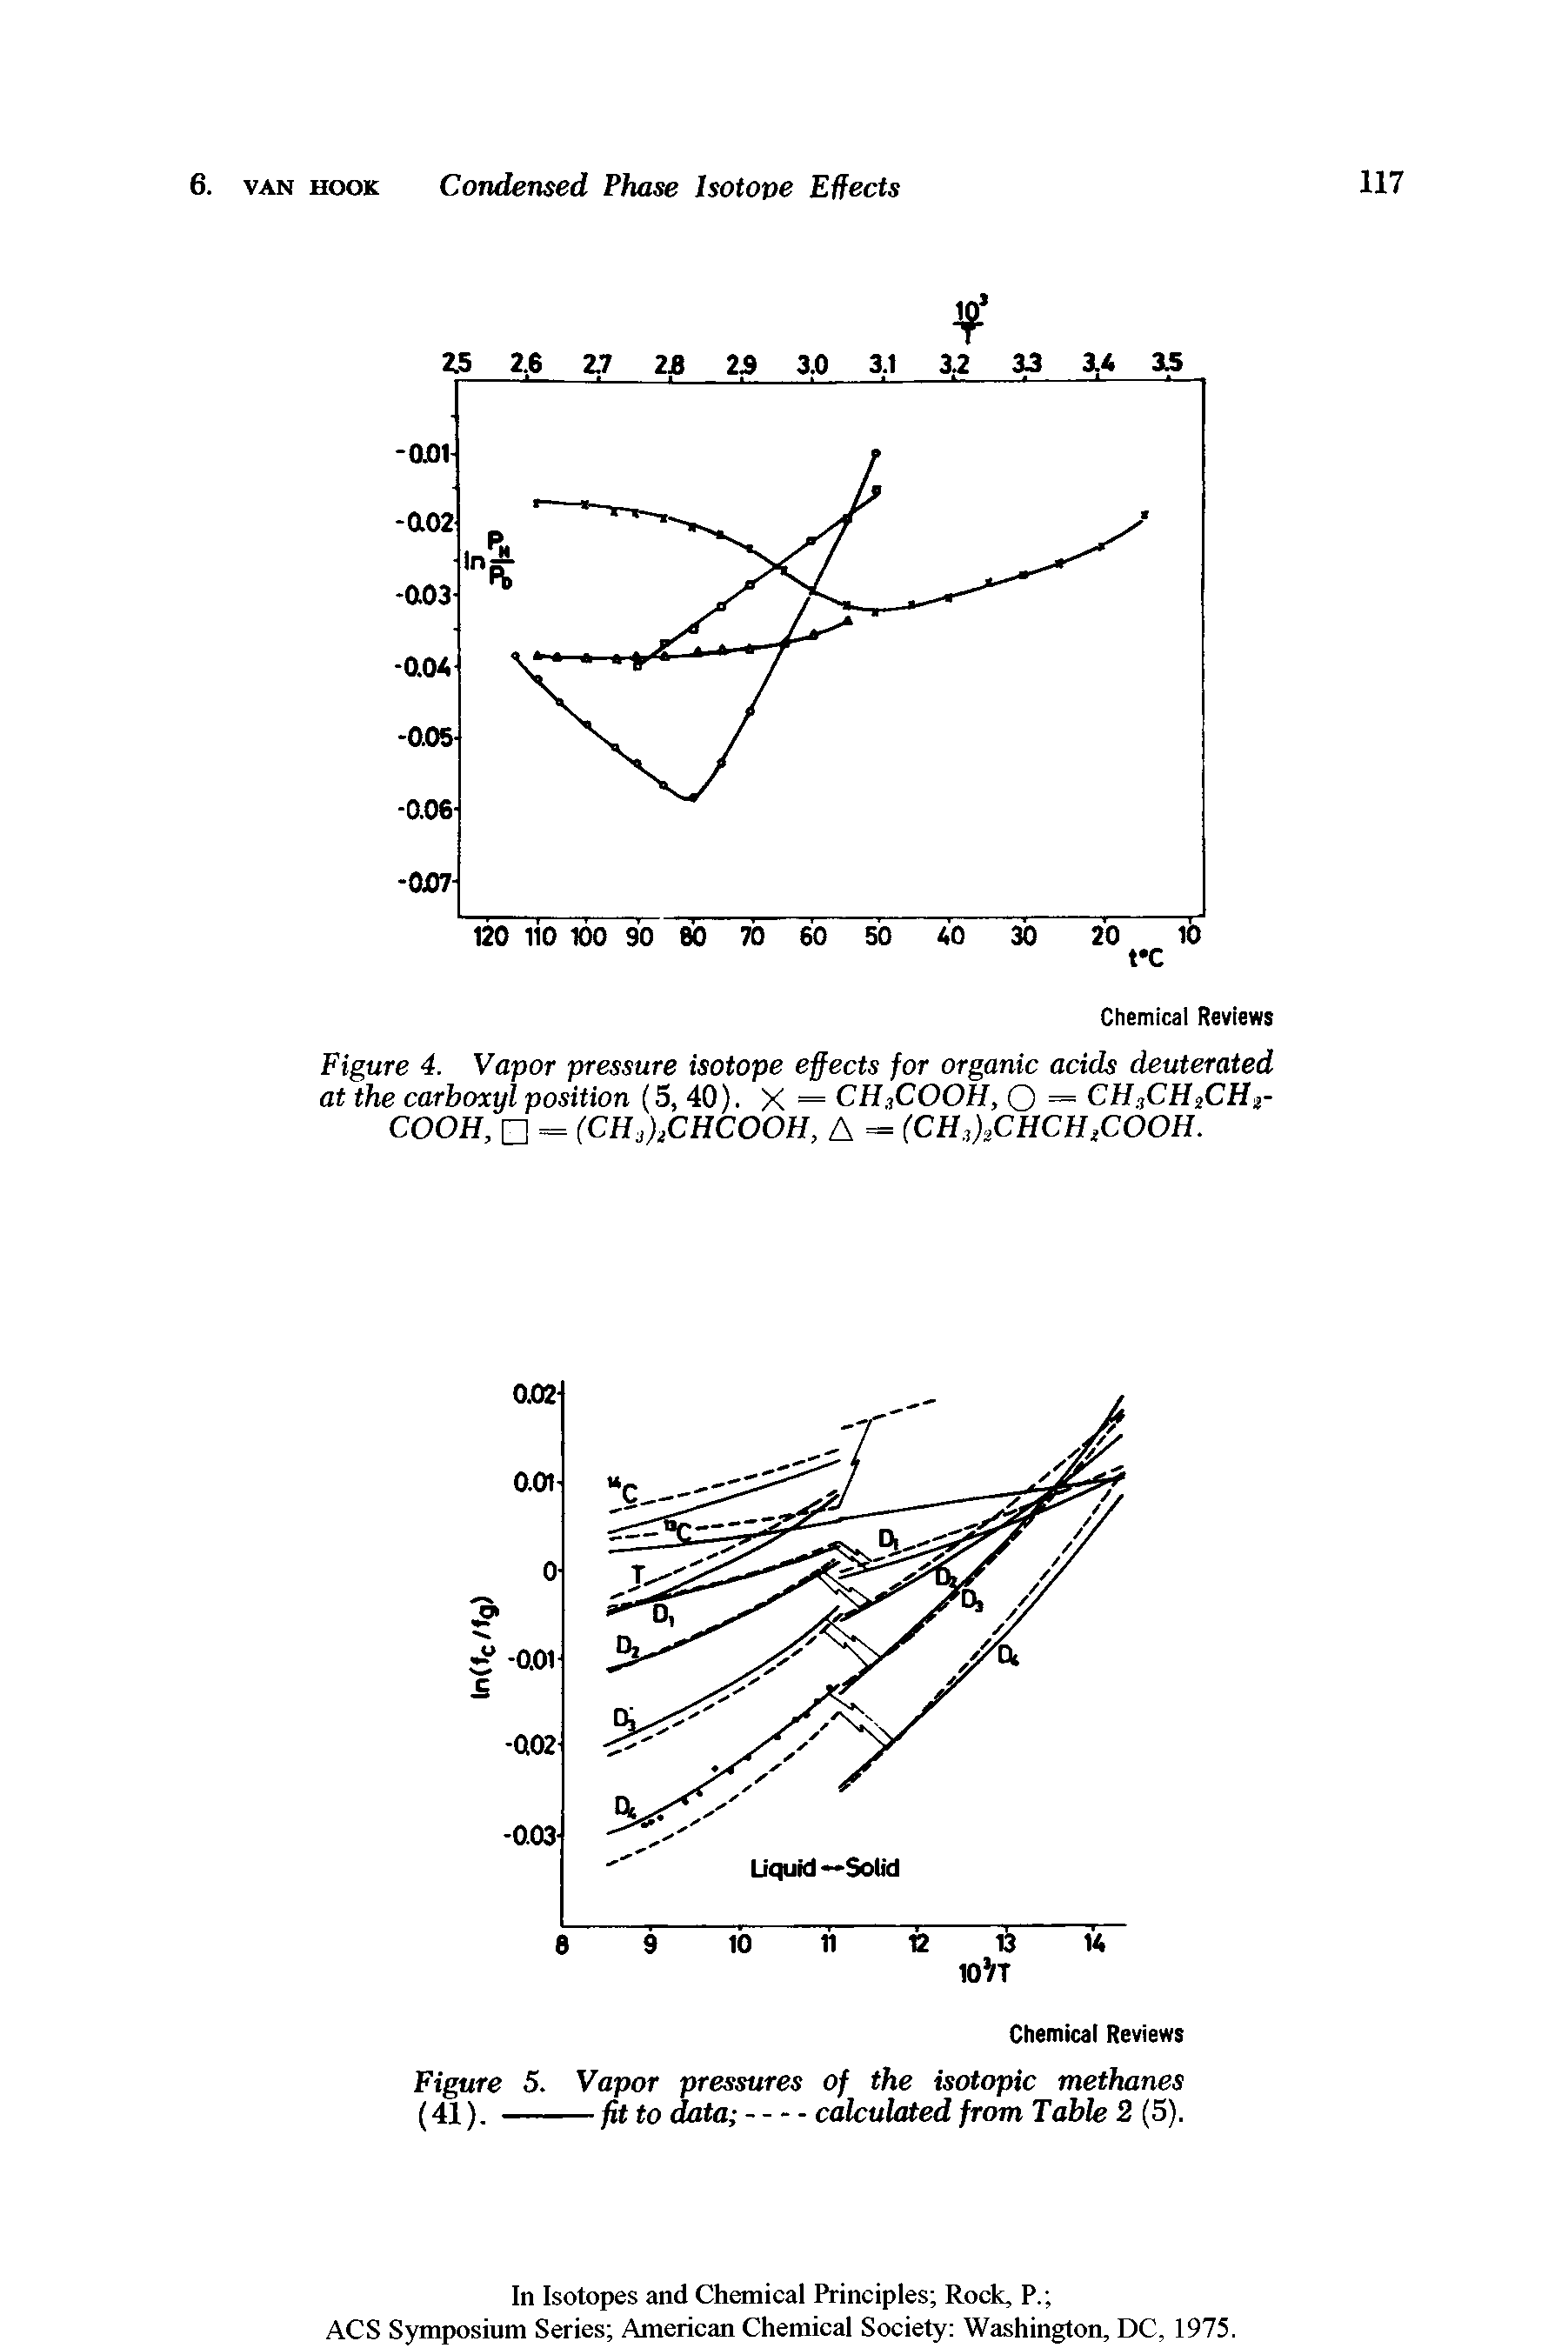 Figure 4. Vapor pressure isotope effects for organic acids deuterated at the carboxyl position (5, 40). X = CH3COOH, O = CH3CH3CH3-COOH, = (CHshCHCOOH, A = (CH hCHCH COOH.